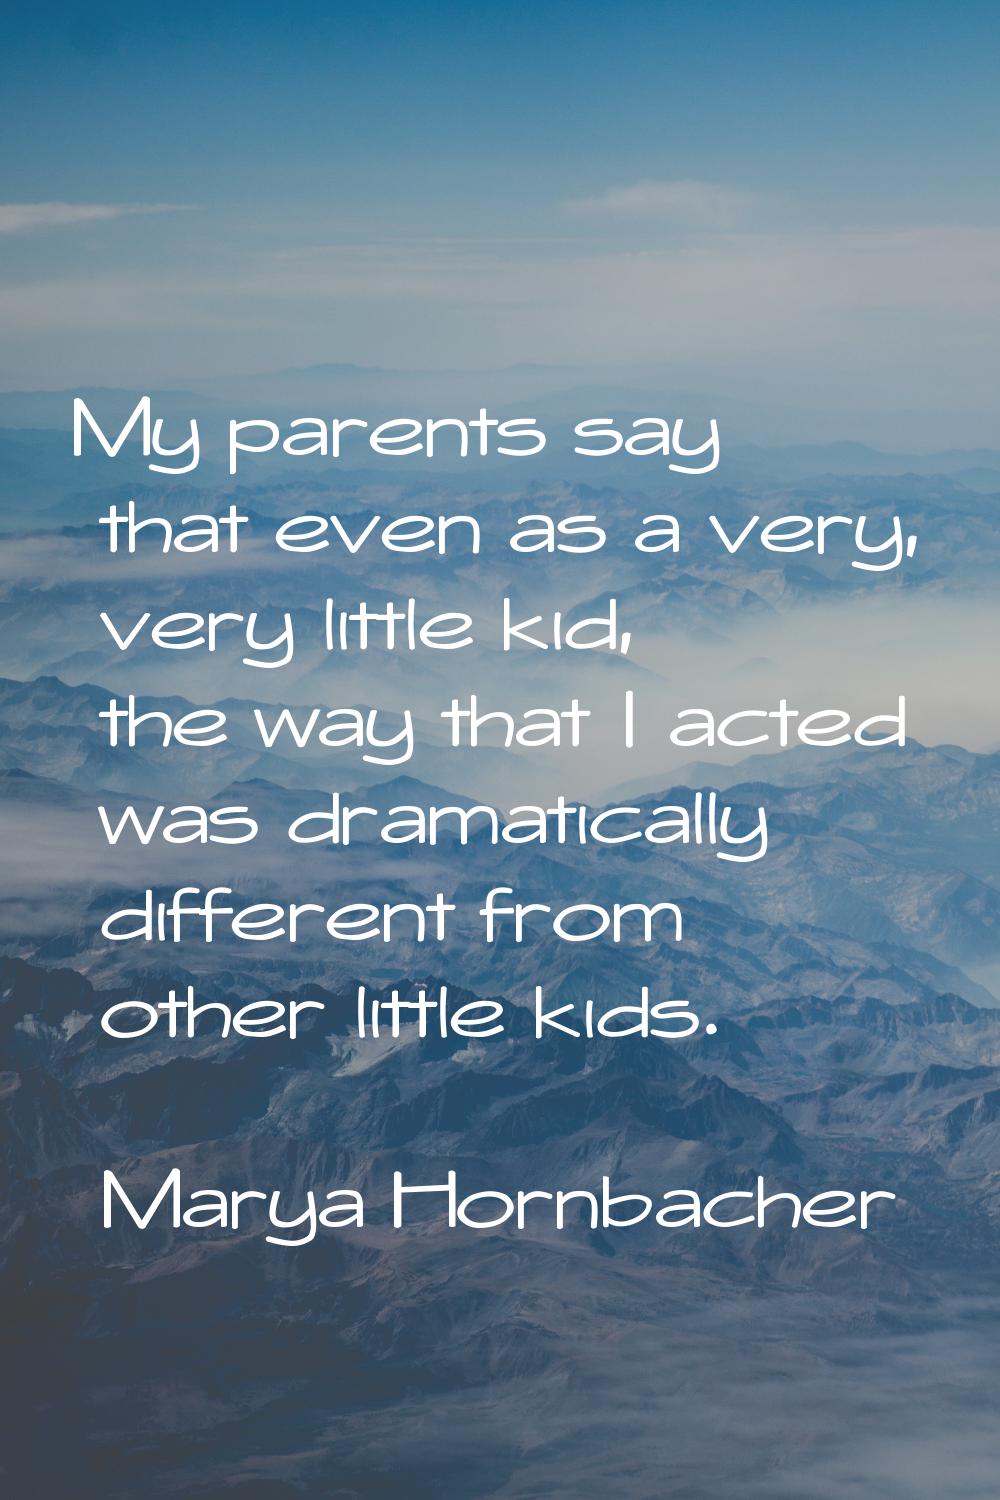 My parents say that even as a very, very little kid, the way that I acted was dramatically differen